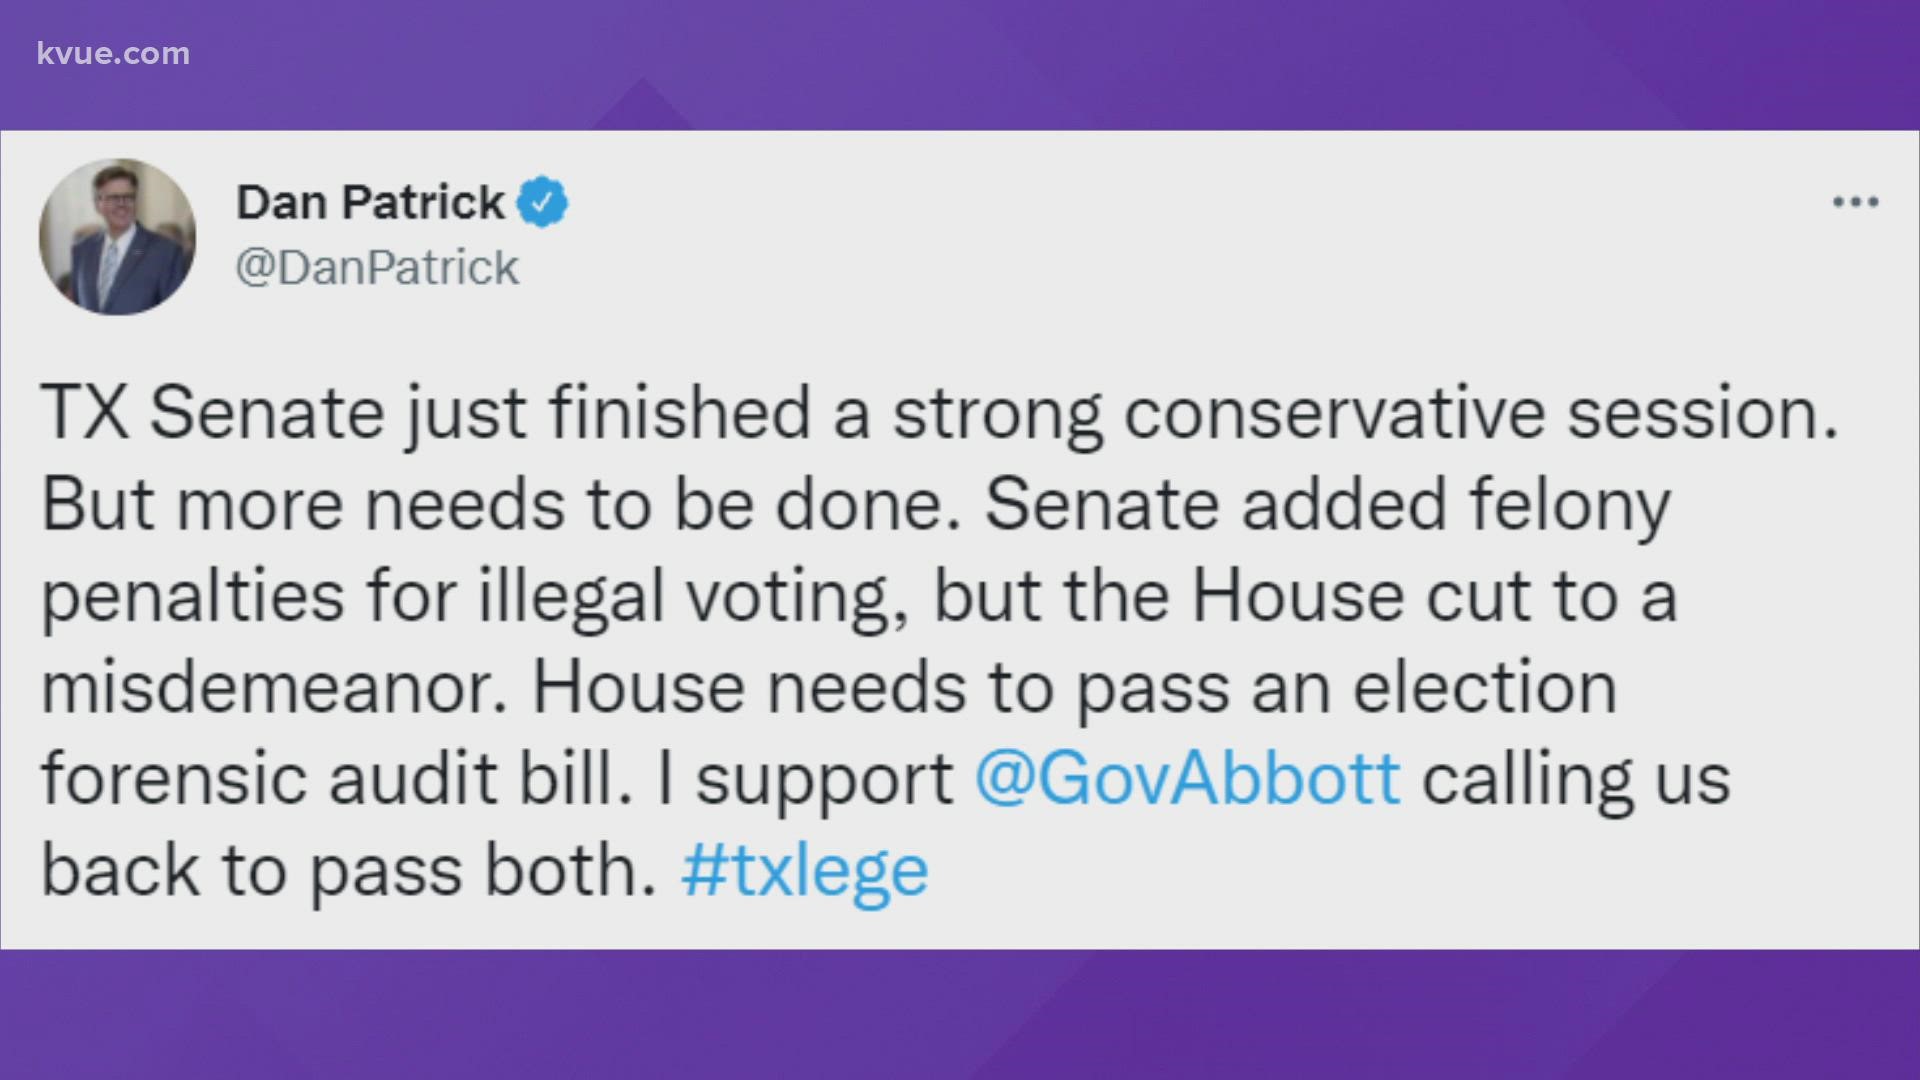 Gov. Greg Abbott's office responded to Patrick in a statement saying there is no need for another special session at this time.